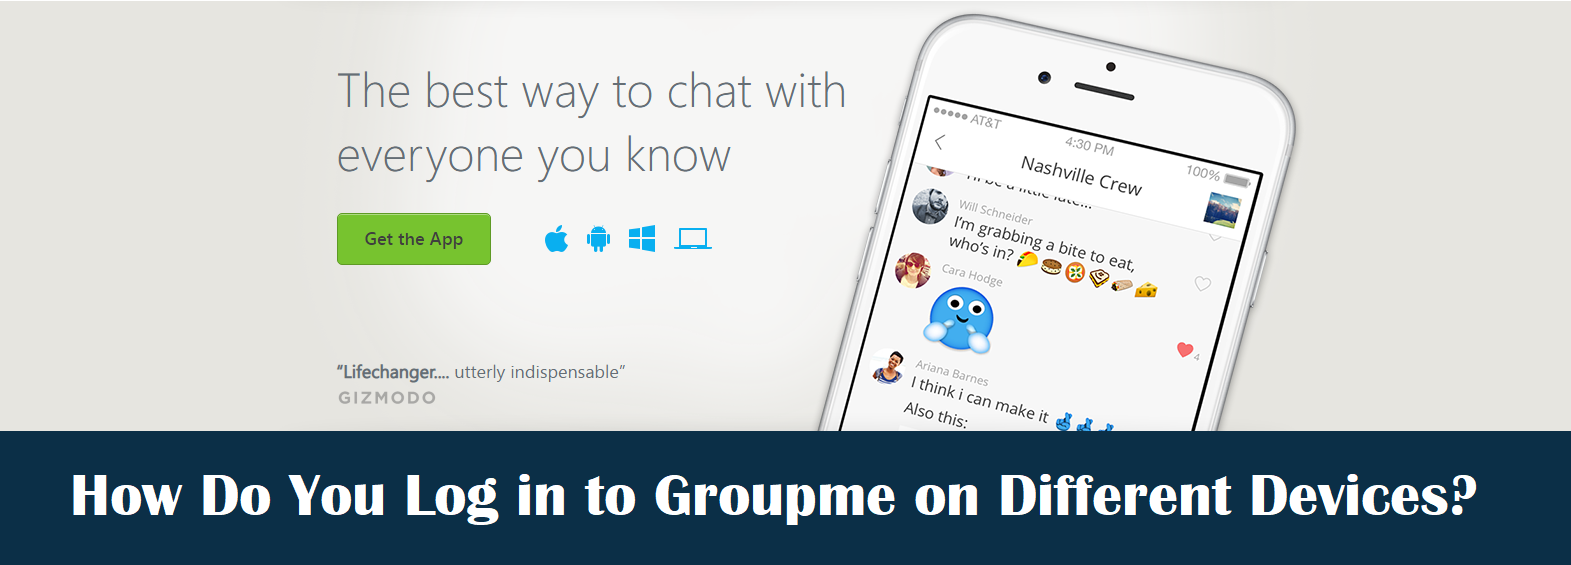 How Do You Log in to Groupme on Different Devices?